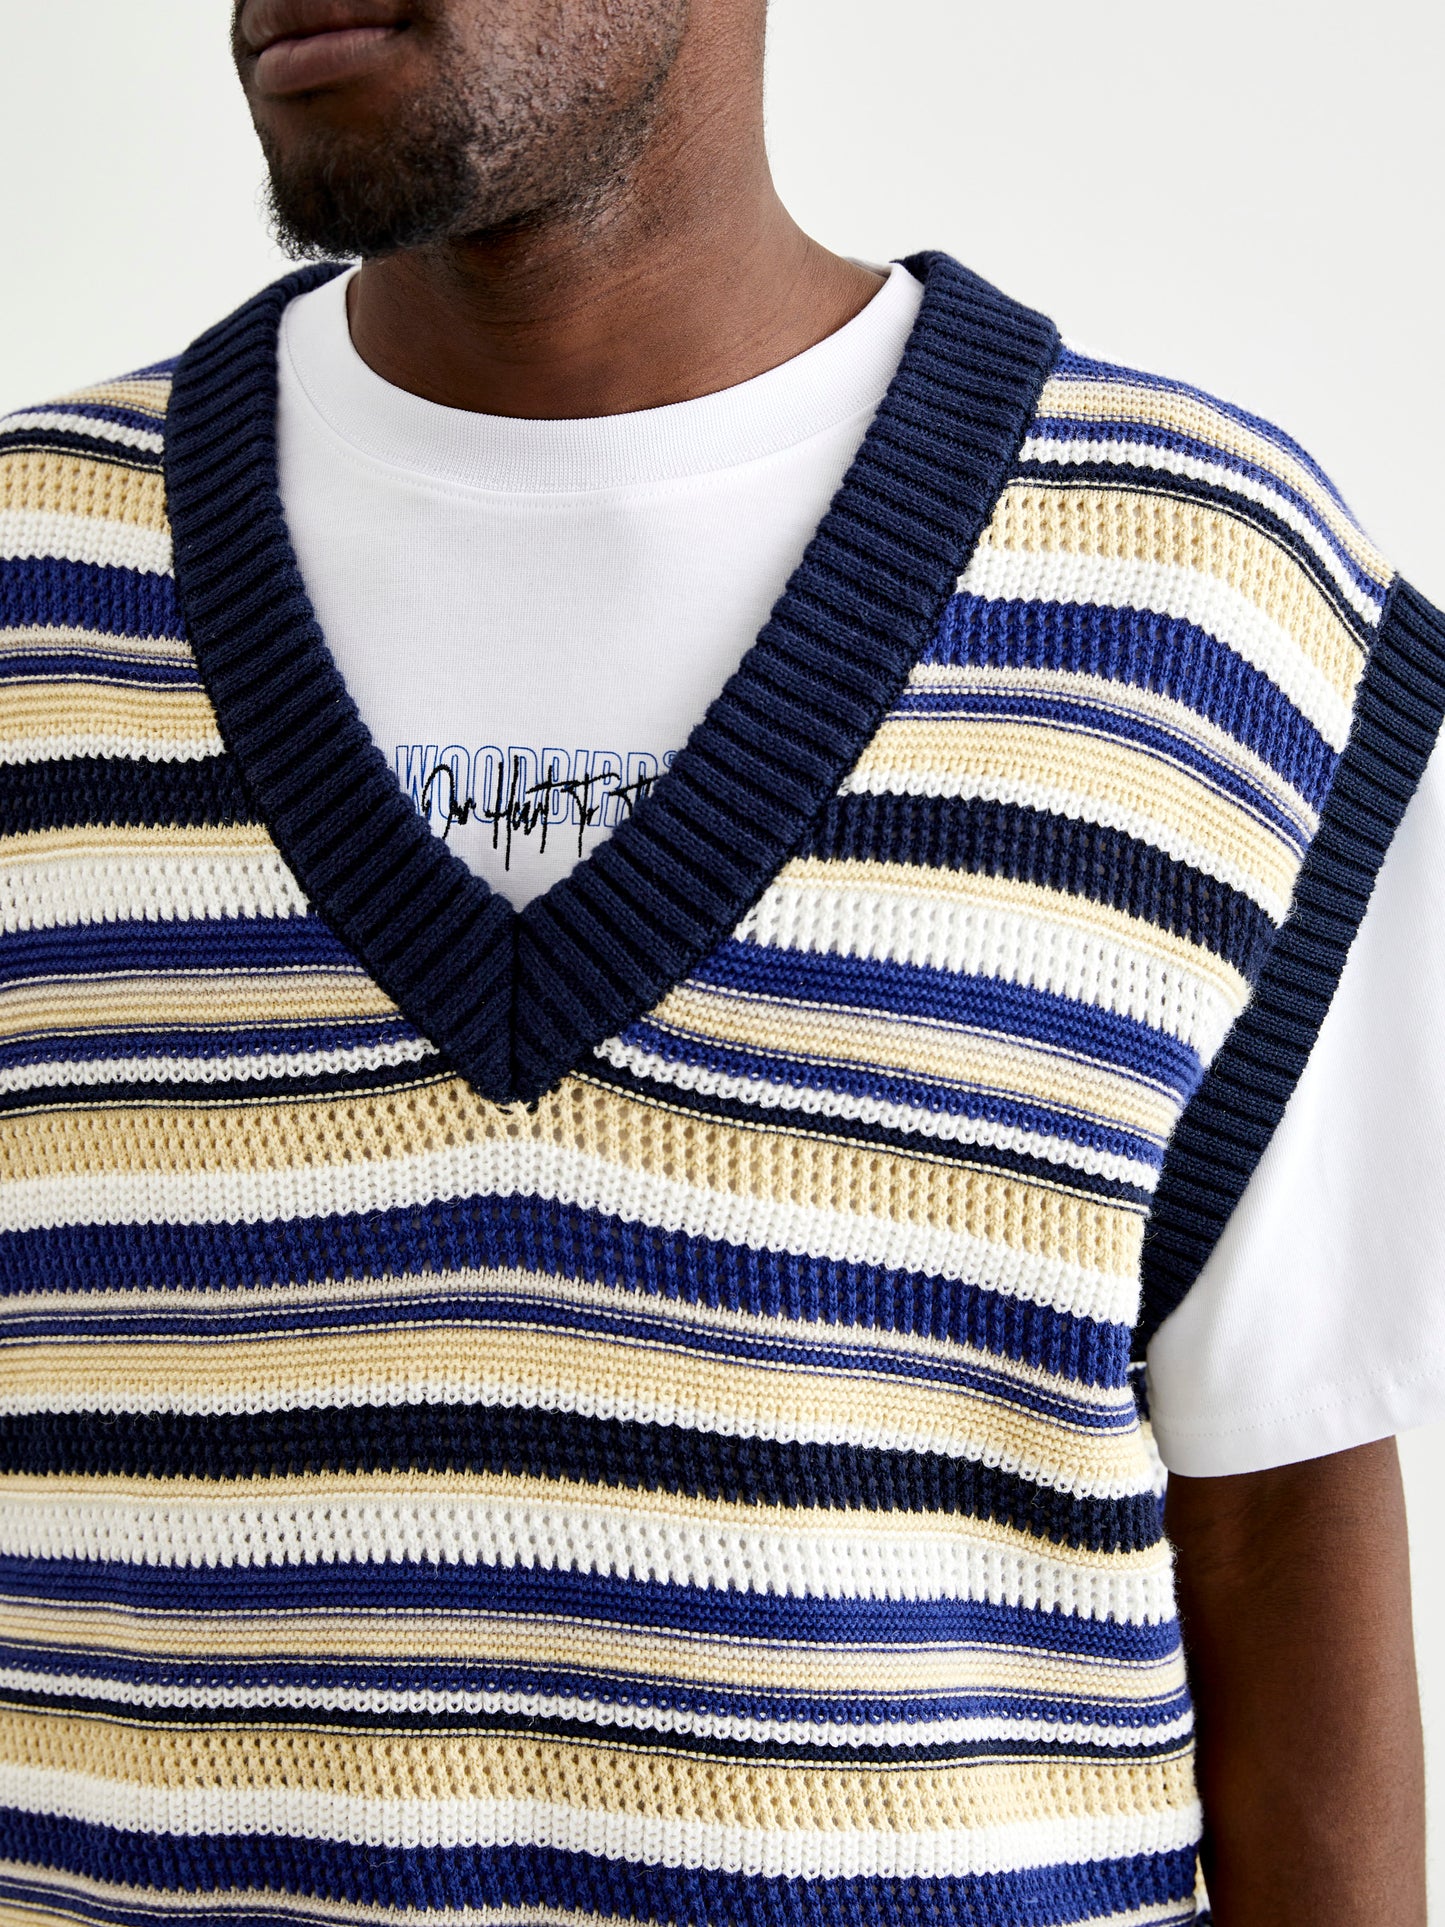 Woodbird WBFeng Structure Vest Knits Navy